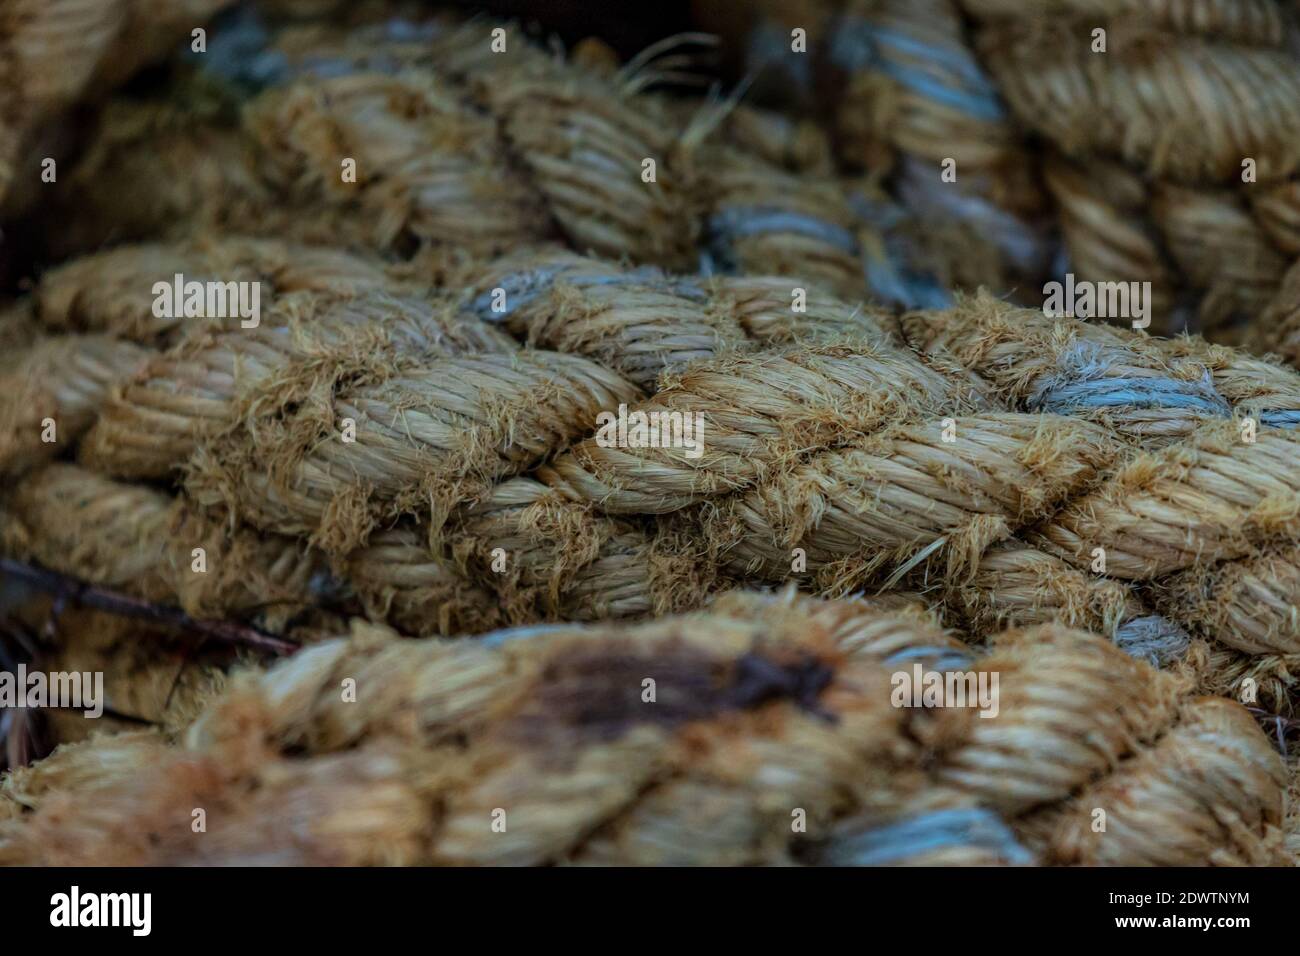 the thick ropes of the ships were washed ashore on the sea shore, forming a worn-out large rope tuft Stock Photo